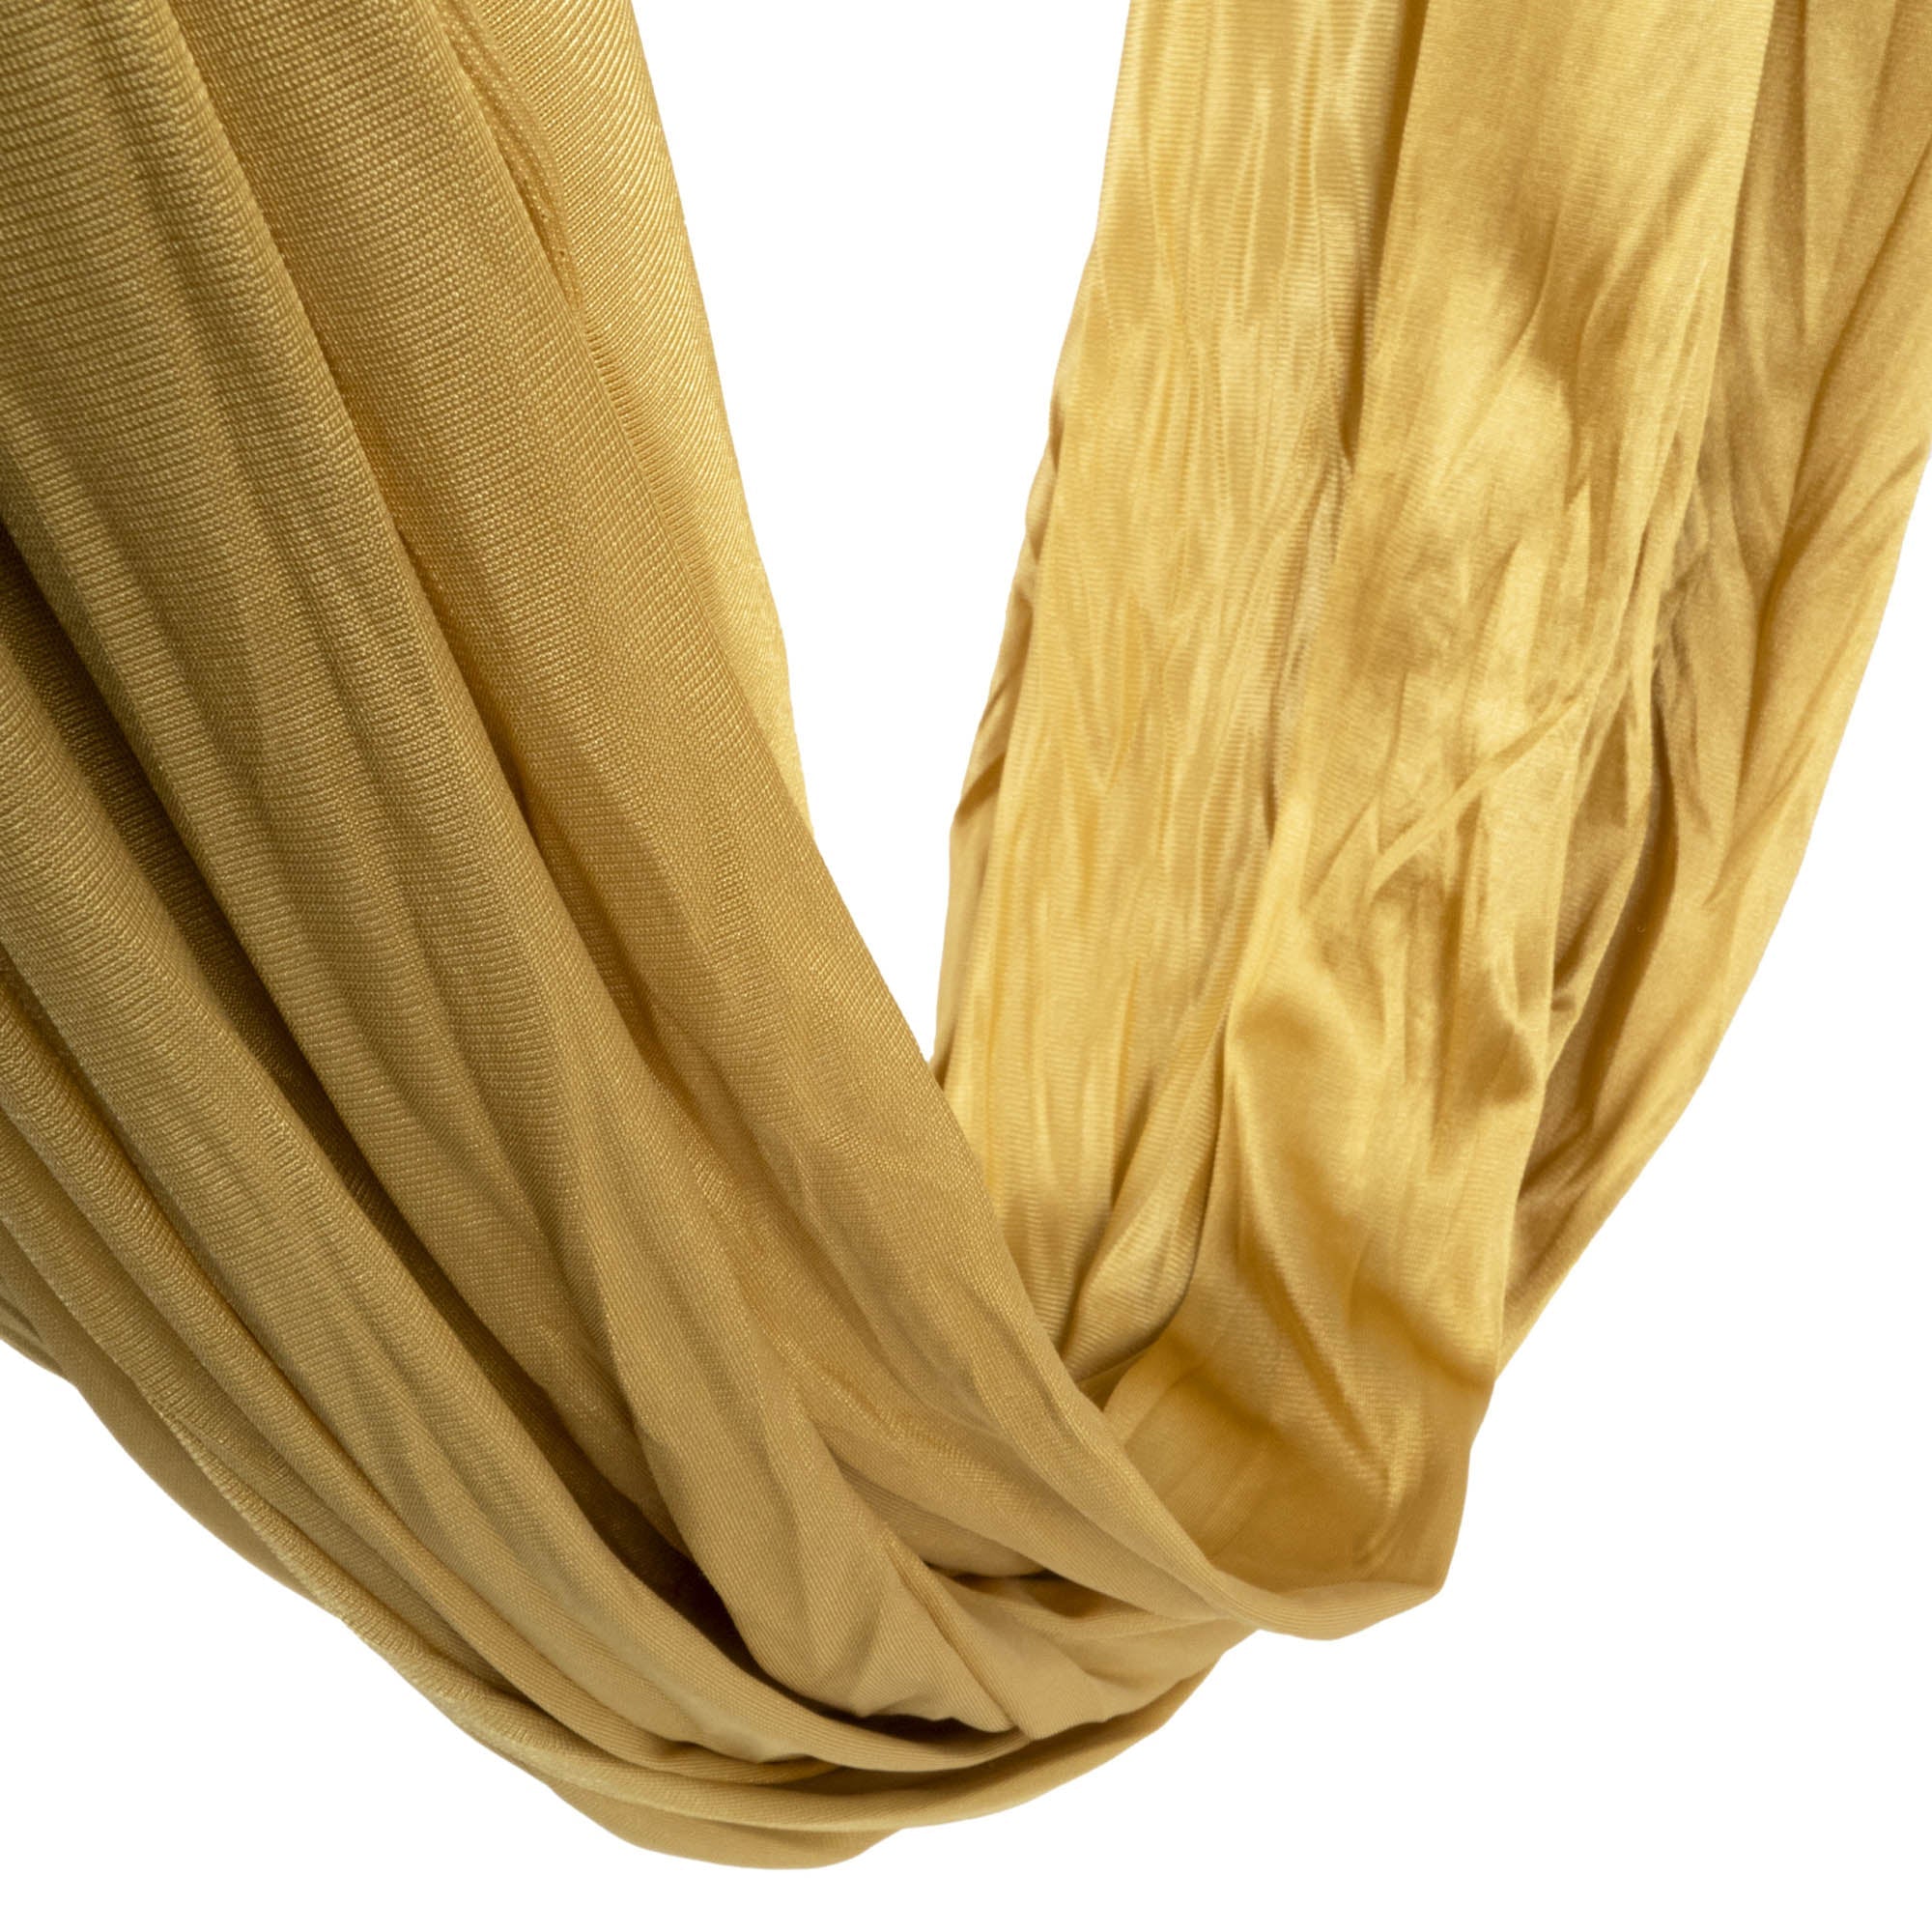 Prodigy 6m aerial yoga hammock in gold close up 